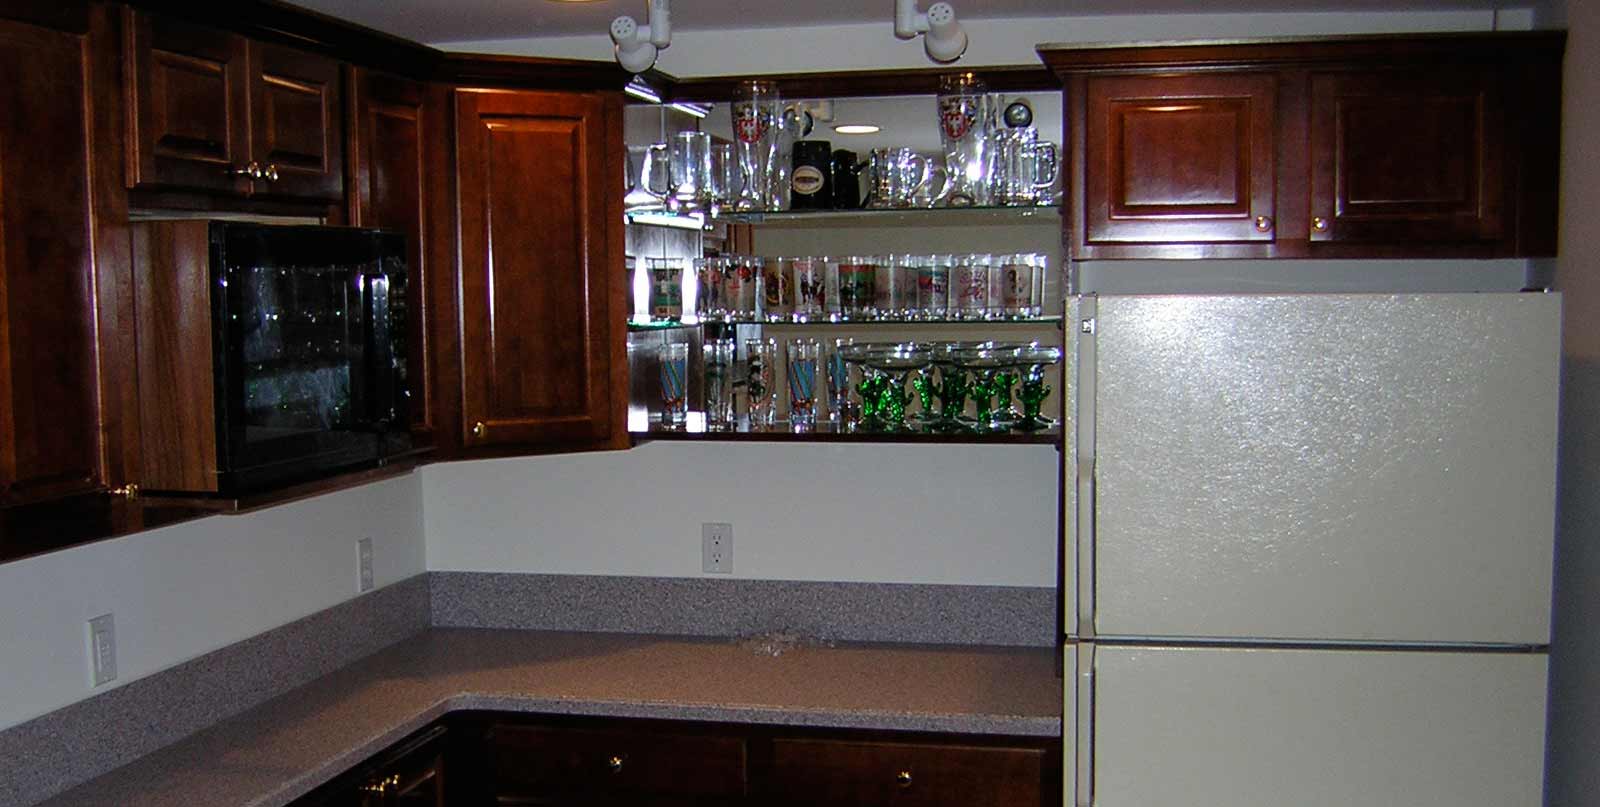 Covenant Construction Group - Basement Remodel, Kitchenette and Bar with Custom Cabinets - Dexter, MI